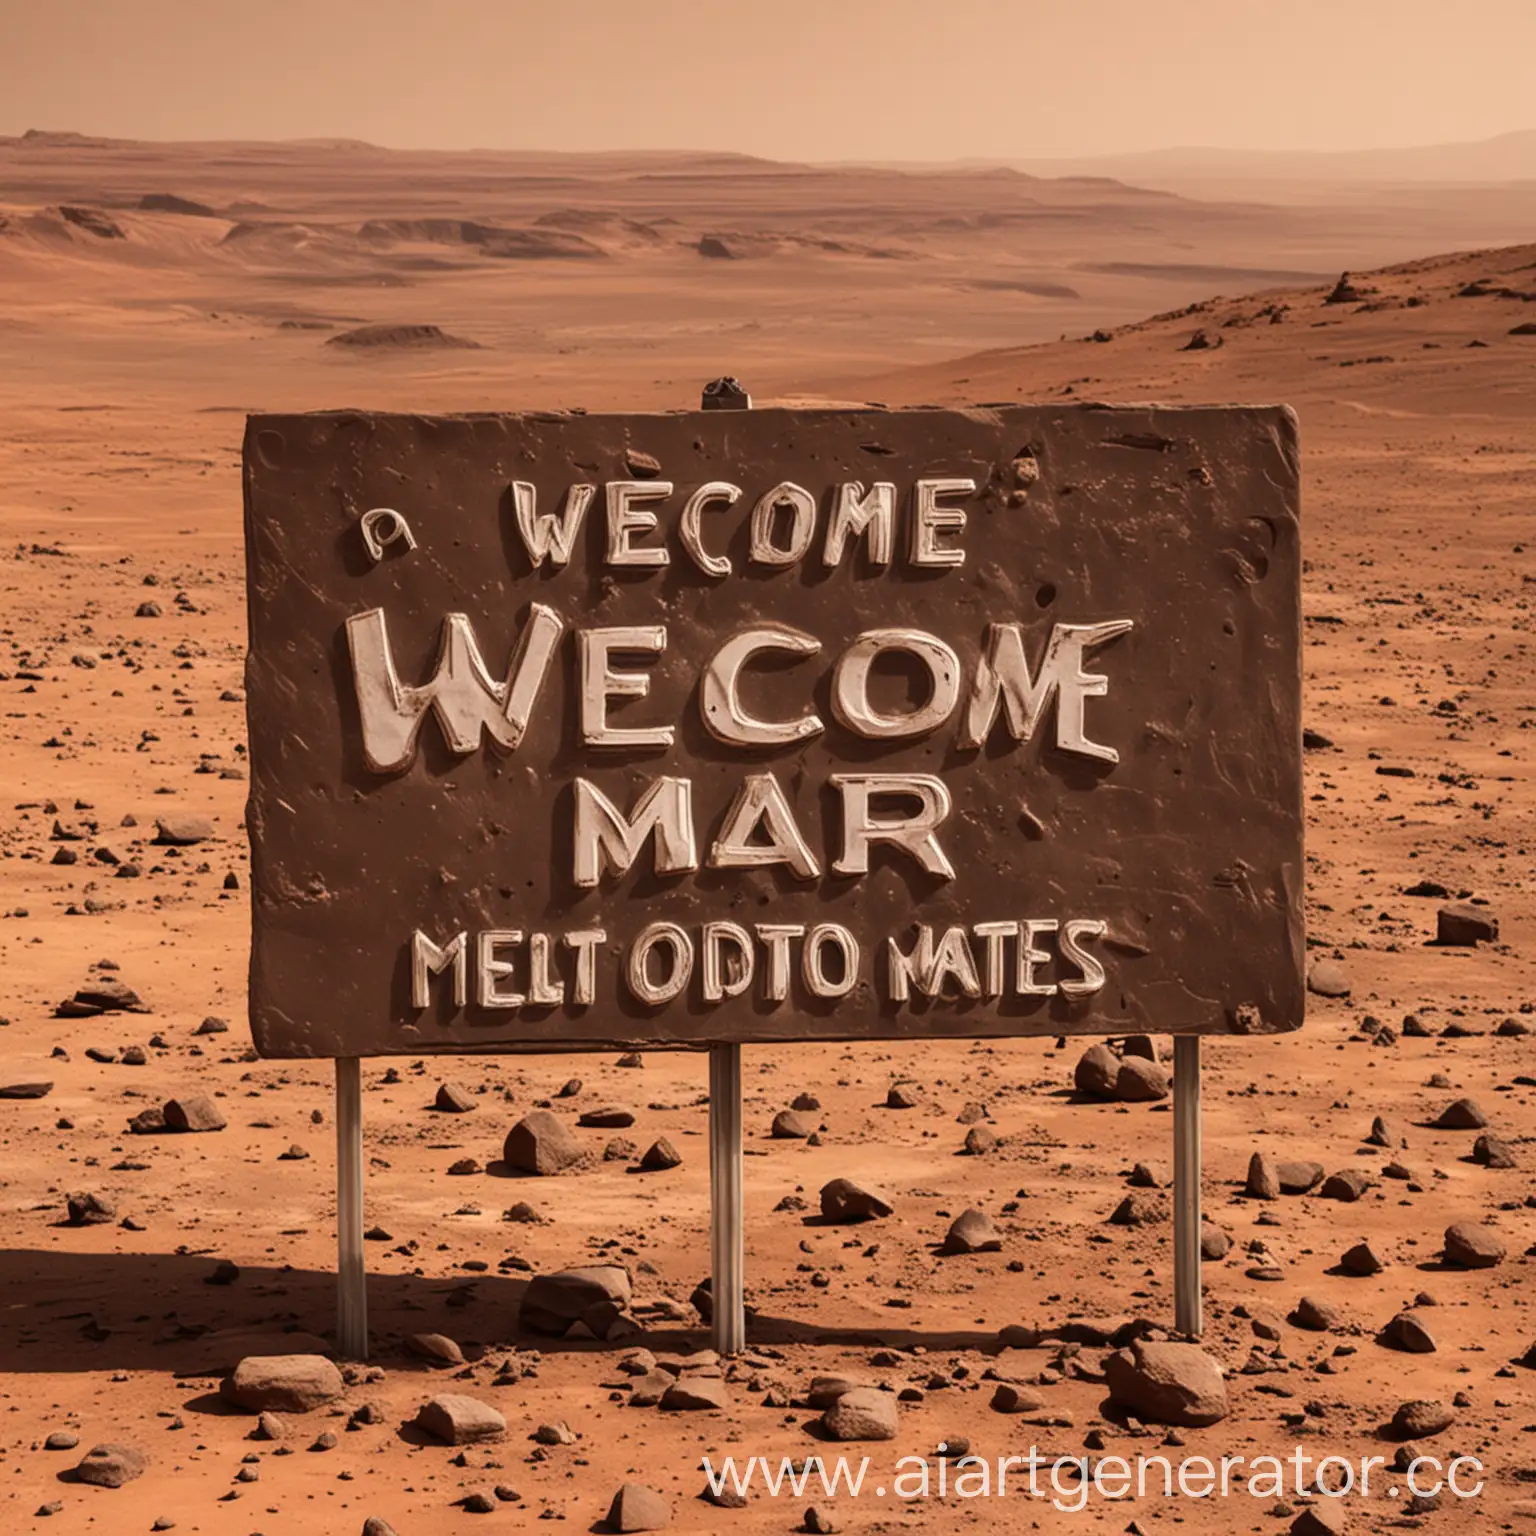 A welcome sign on Mars